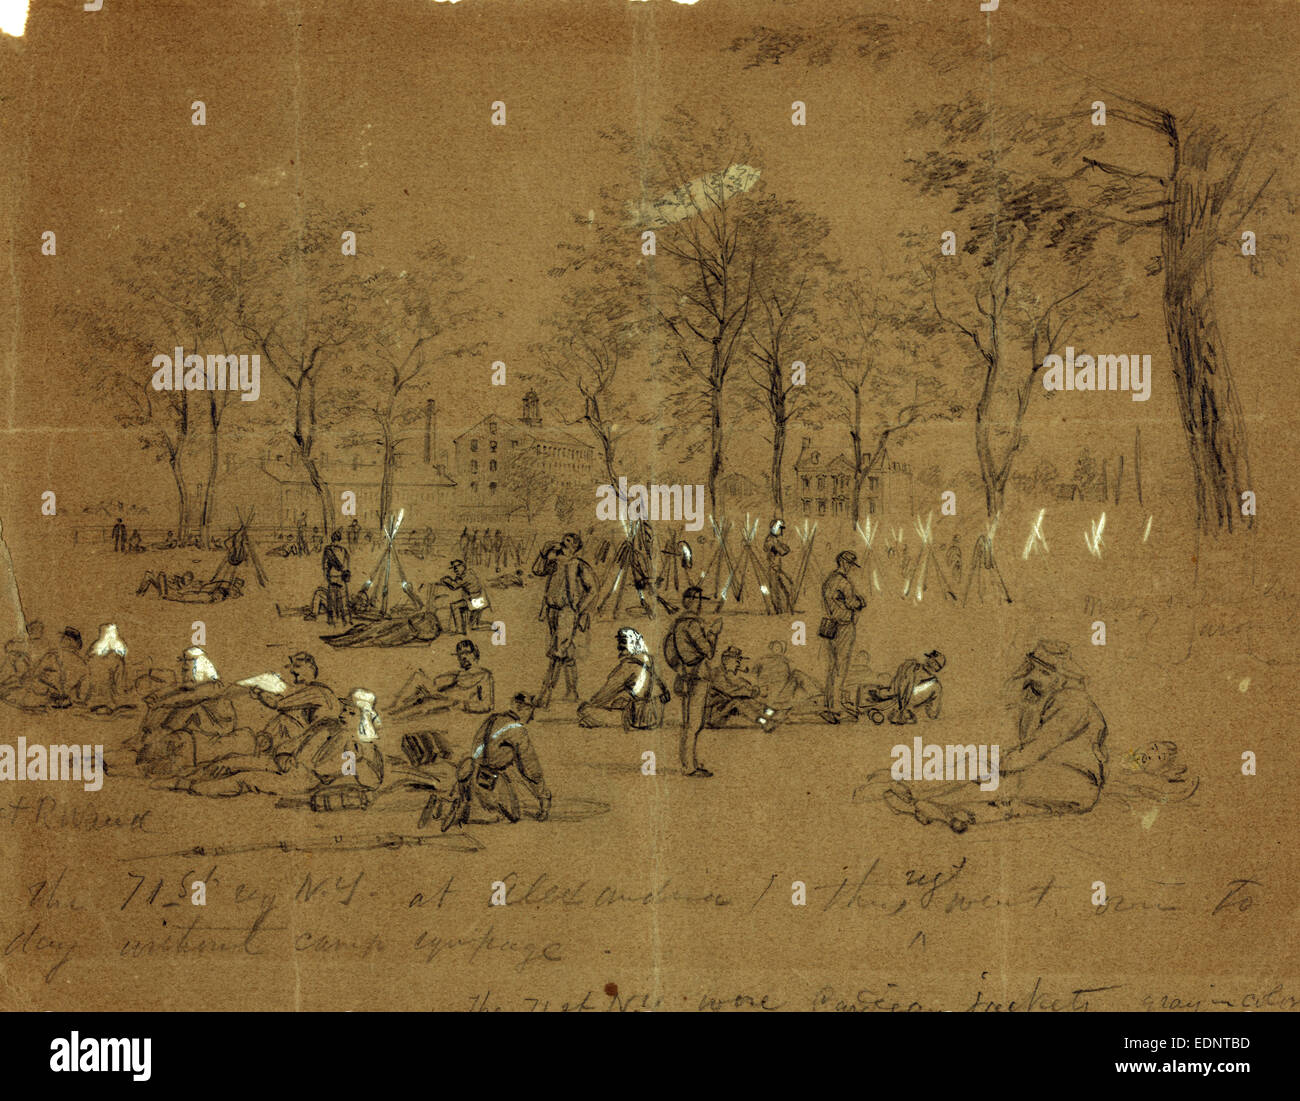 The 71st reg. N.Y. at Alexandria, 1861 May 24-31, drawing on brown paper pencil and Chinese white Stock Photo